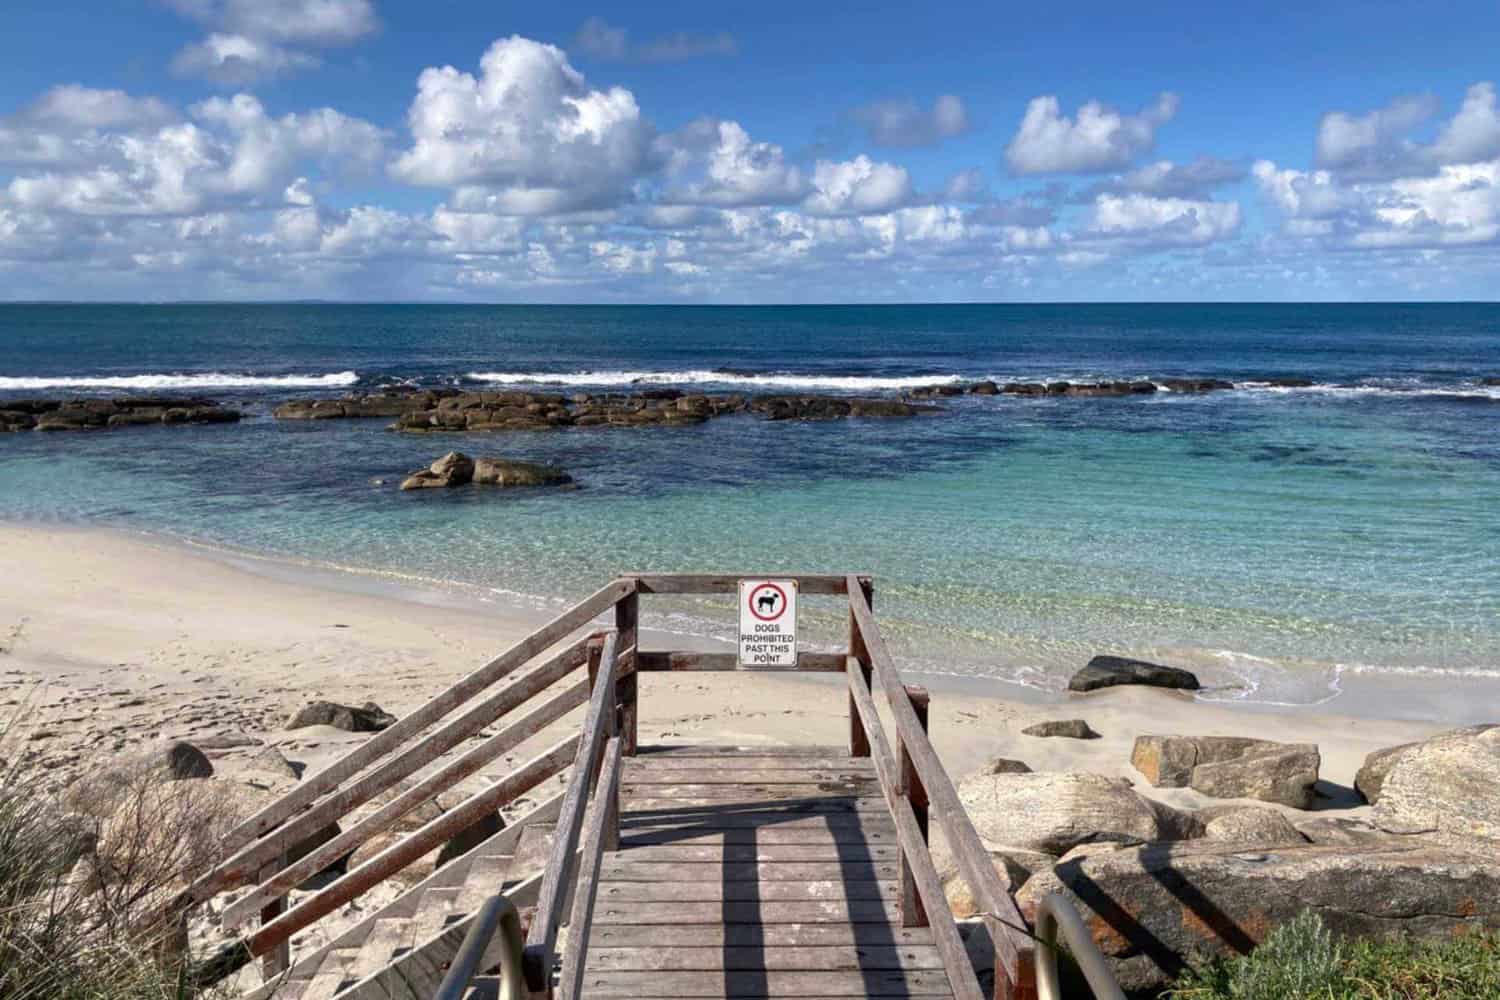 A wooden staircase leads down to the inviting clear waters of an Augusta beach, Granny's Pool, framed by rock formations that create natural pools, with a 'No Dogs' sign reminding visitors of the sanctuary's rules under a sky dotted with fluffy clouds.